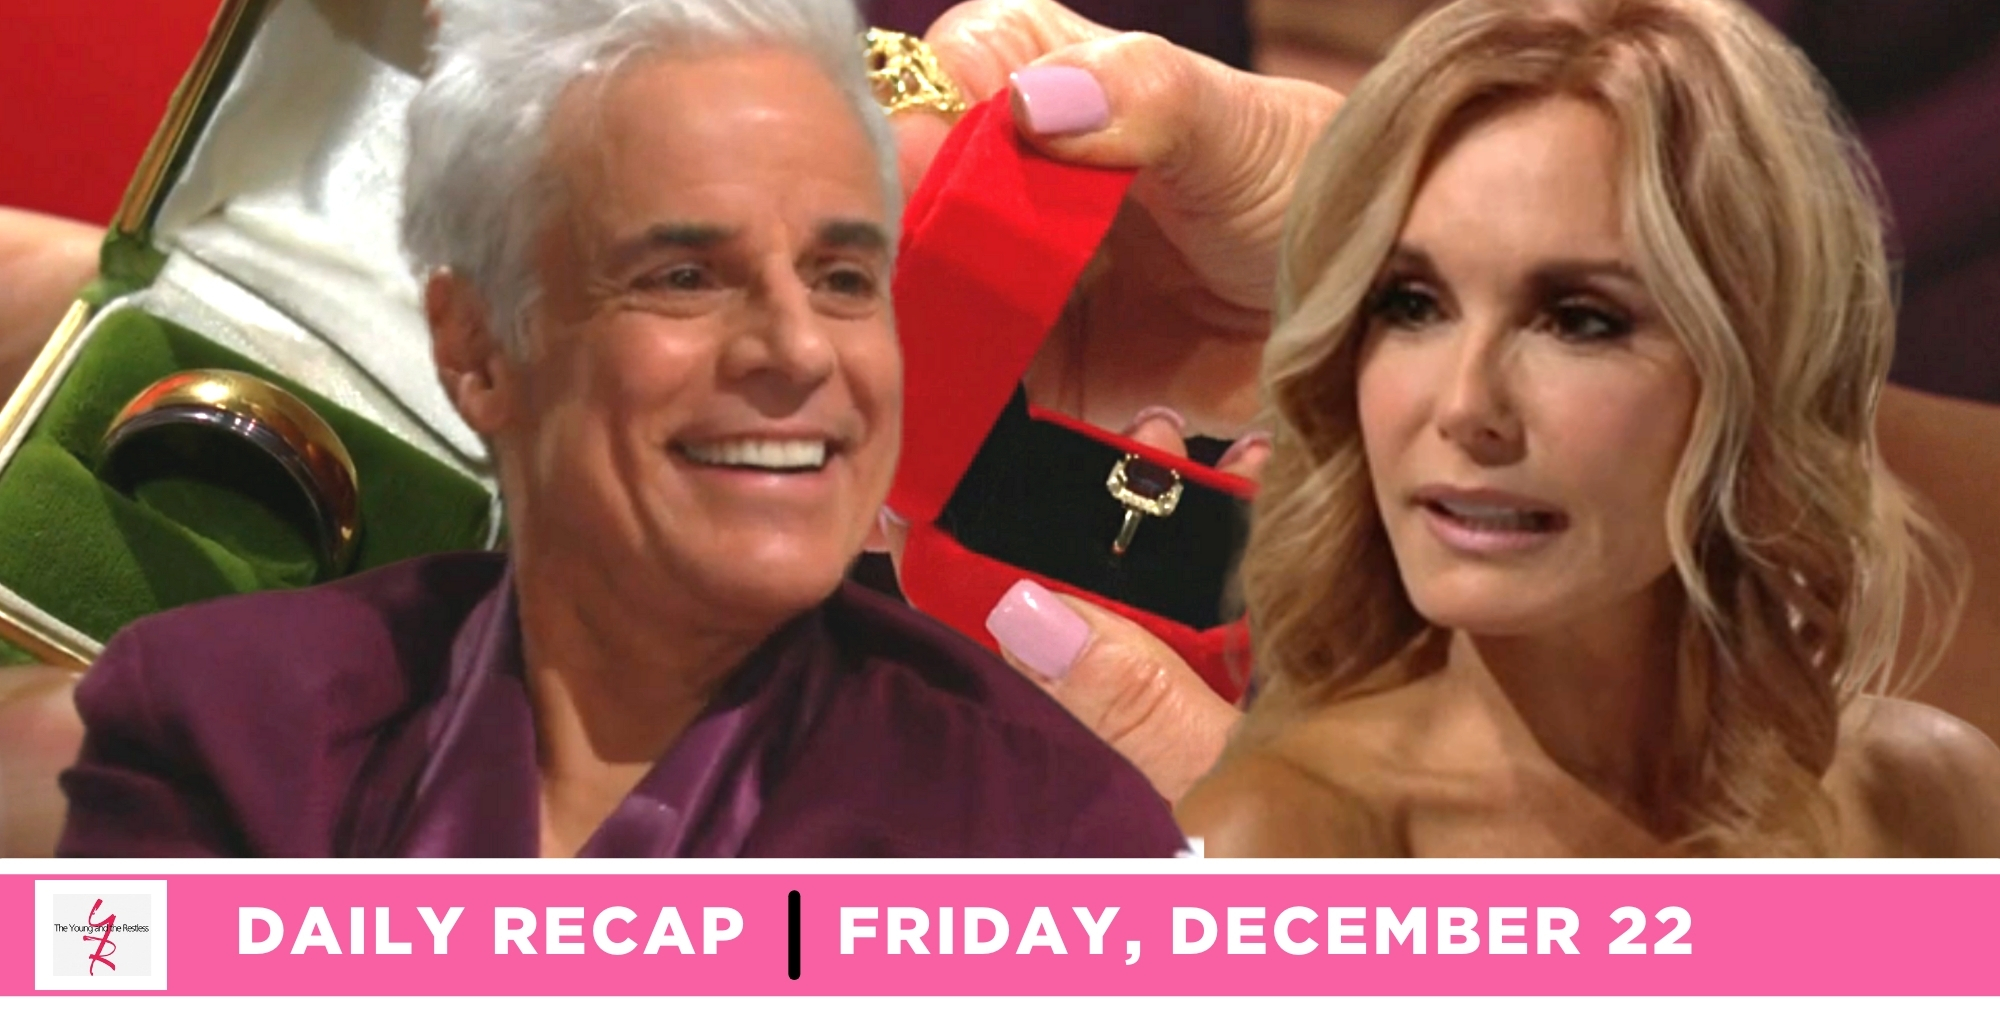 young and the restless recap for december 22, episode 12772, has michael and lauren with new rings.